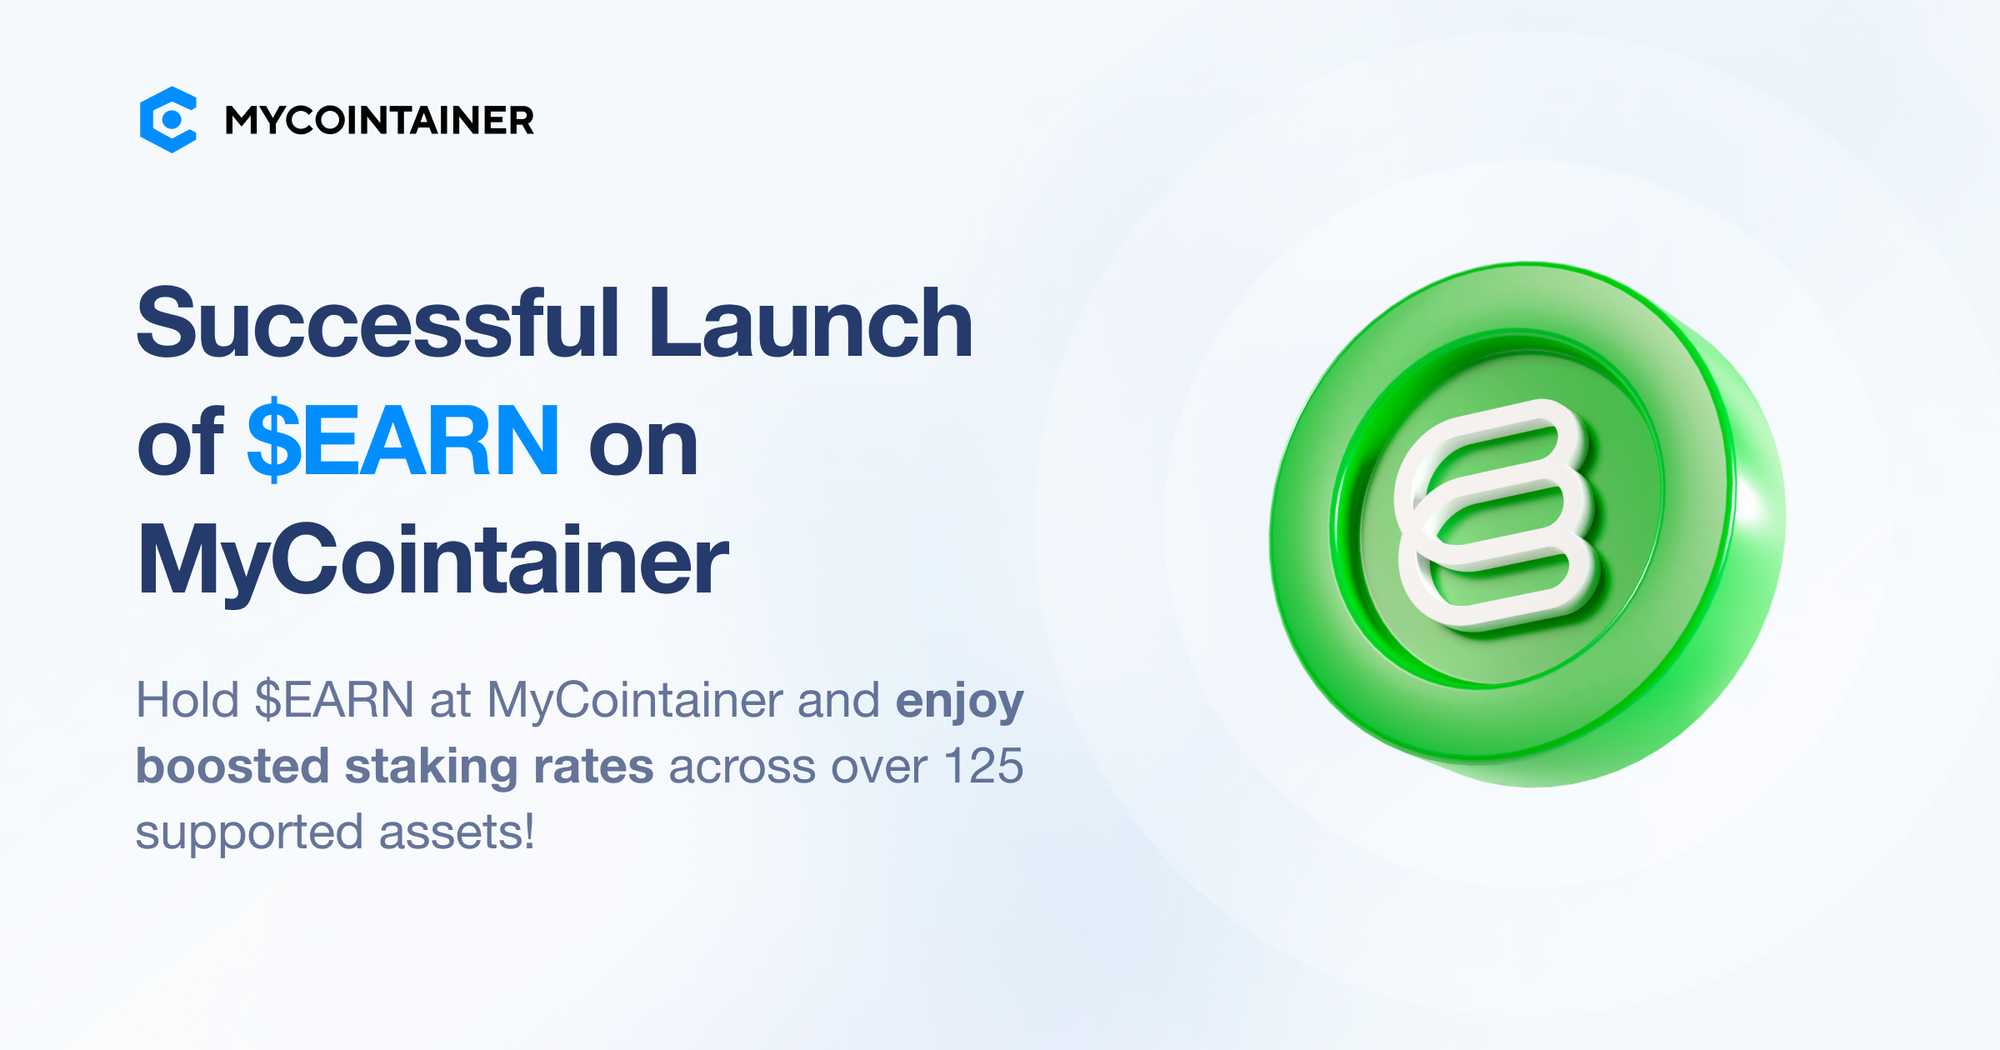 MyCointainer integrates $EARN token - the native asset of the Earn Network